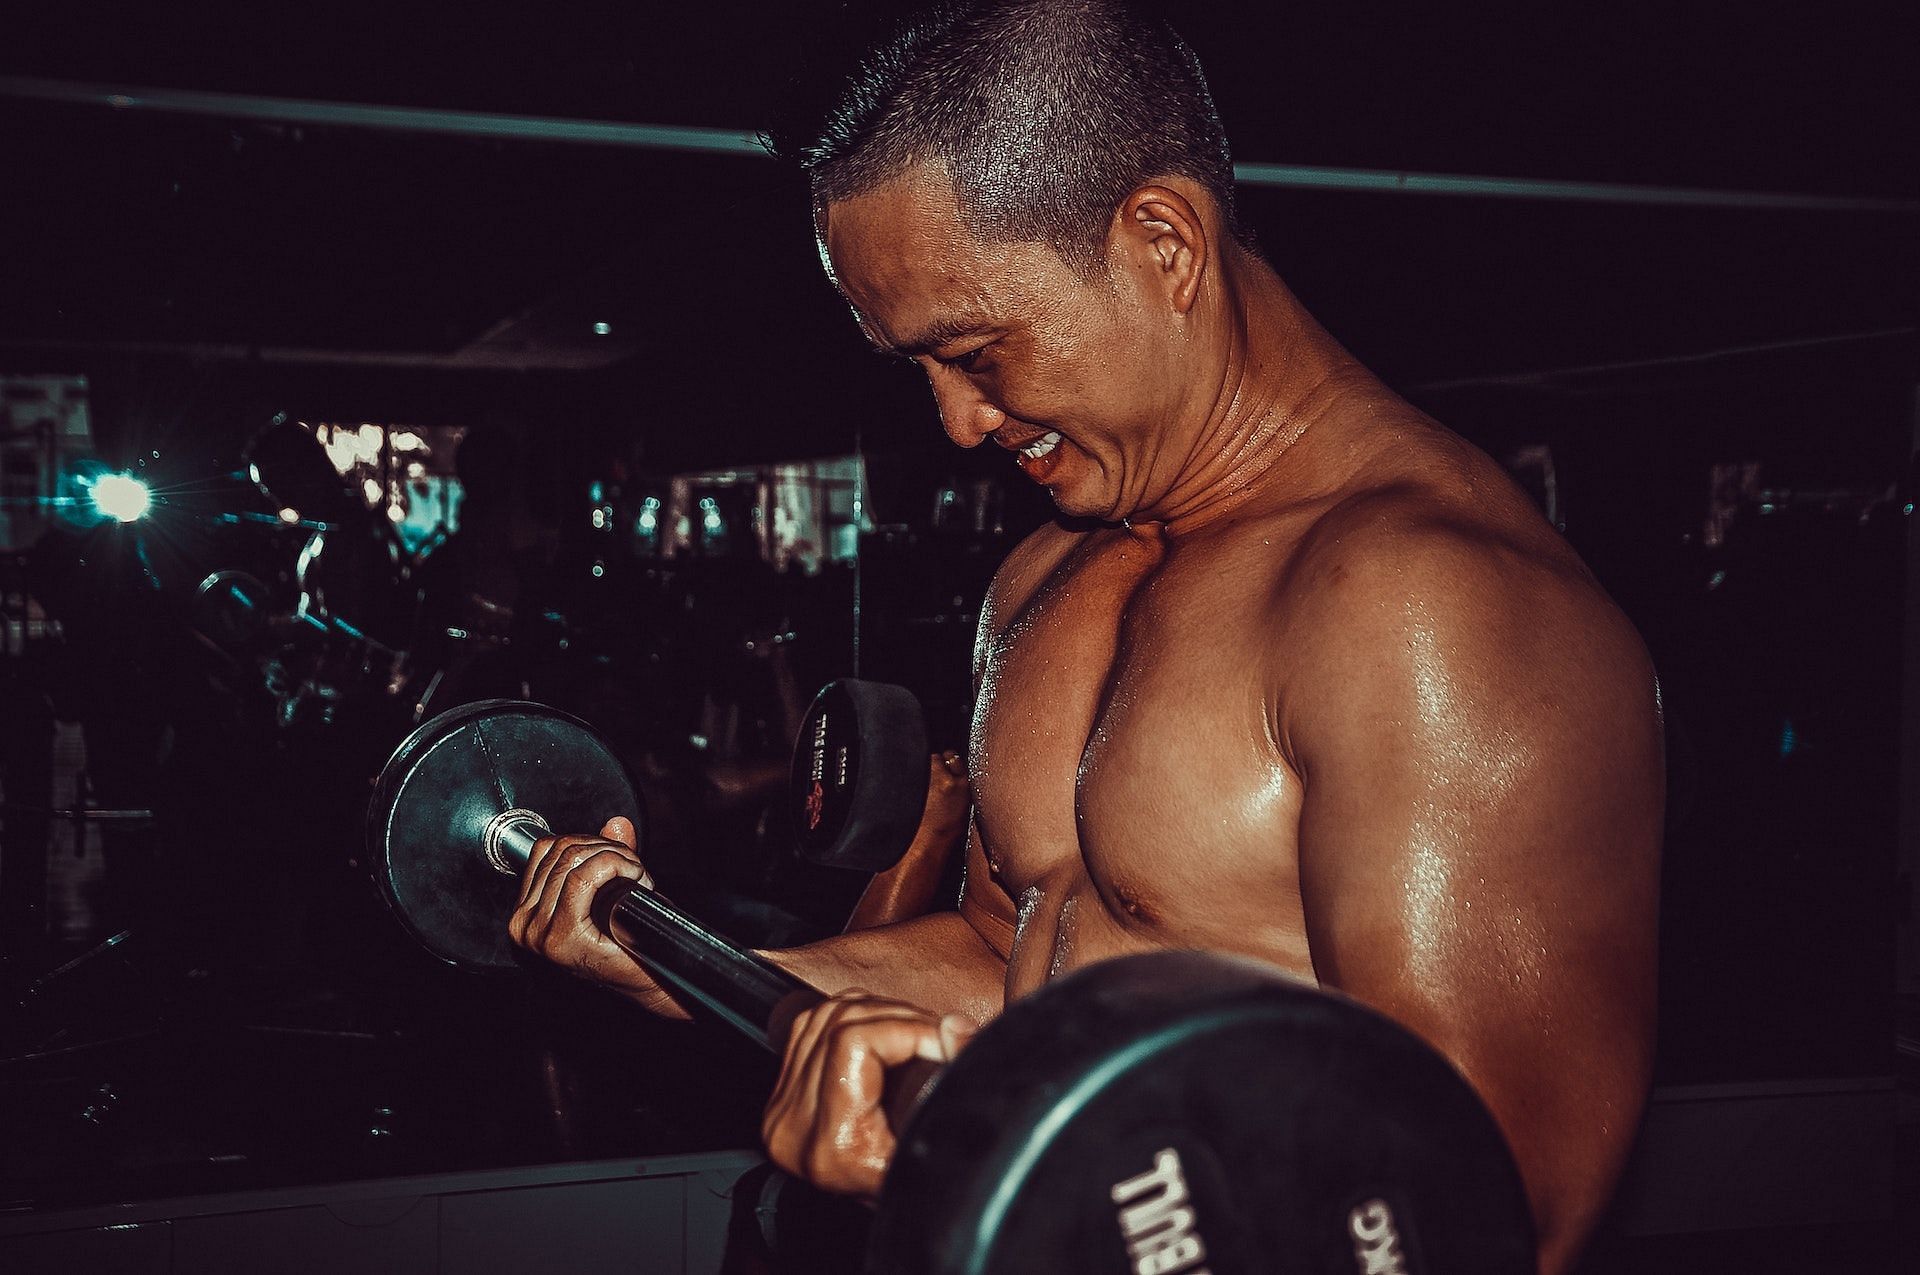 Chest compound exercises target several muscles at once. (Photo via Pexels/Tristan Le)